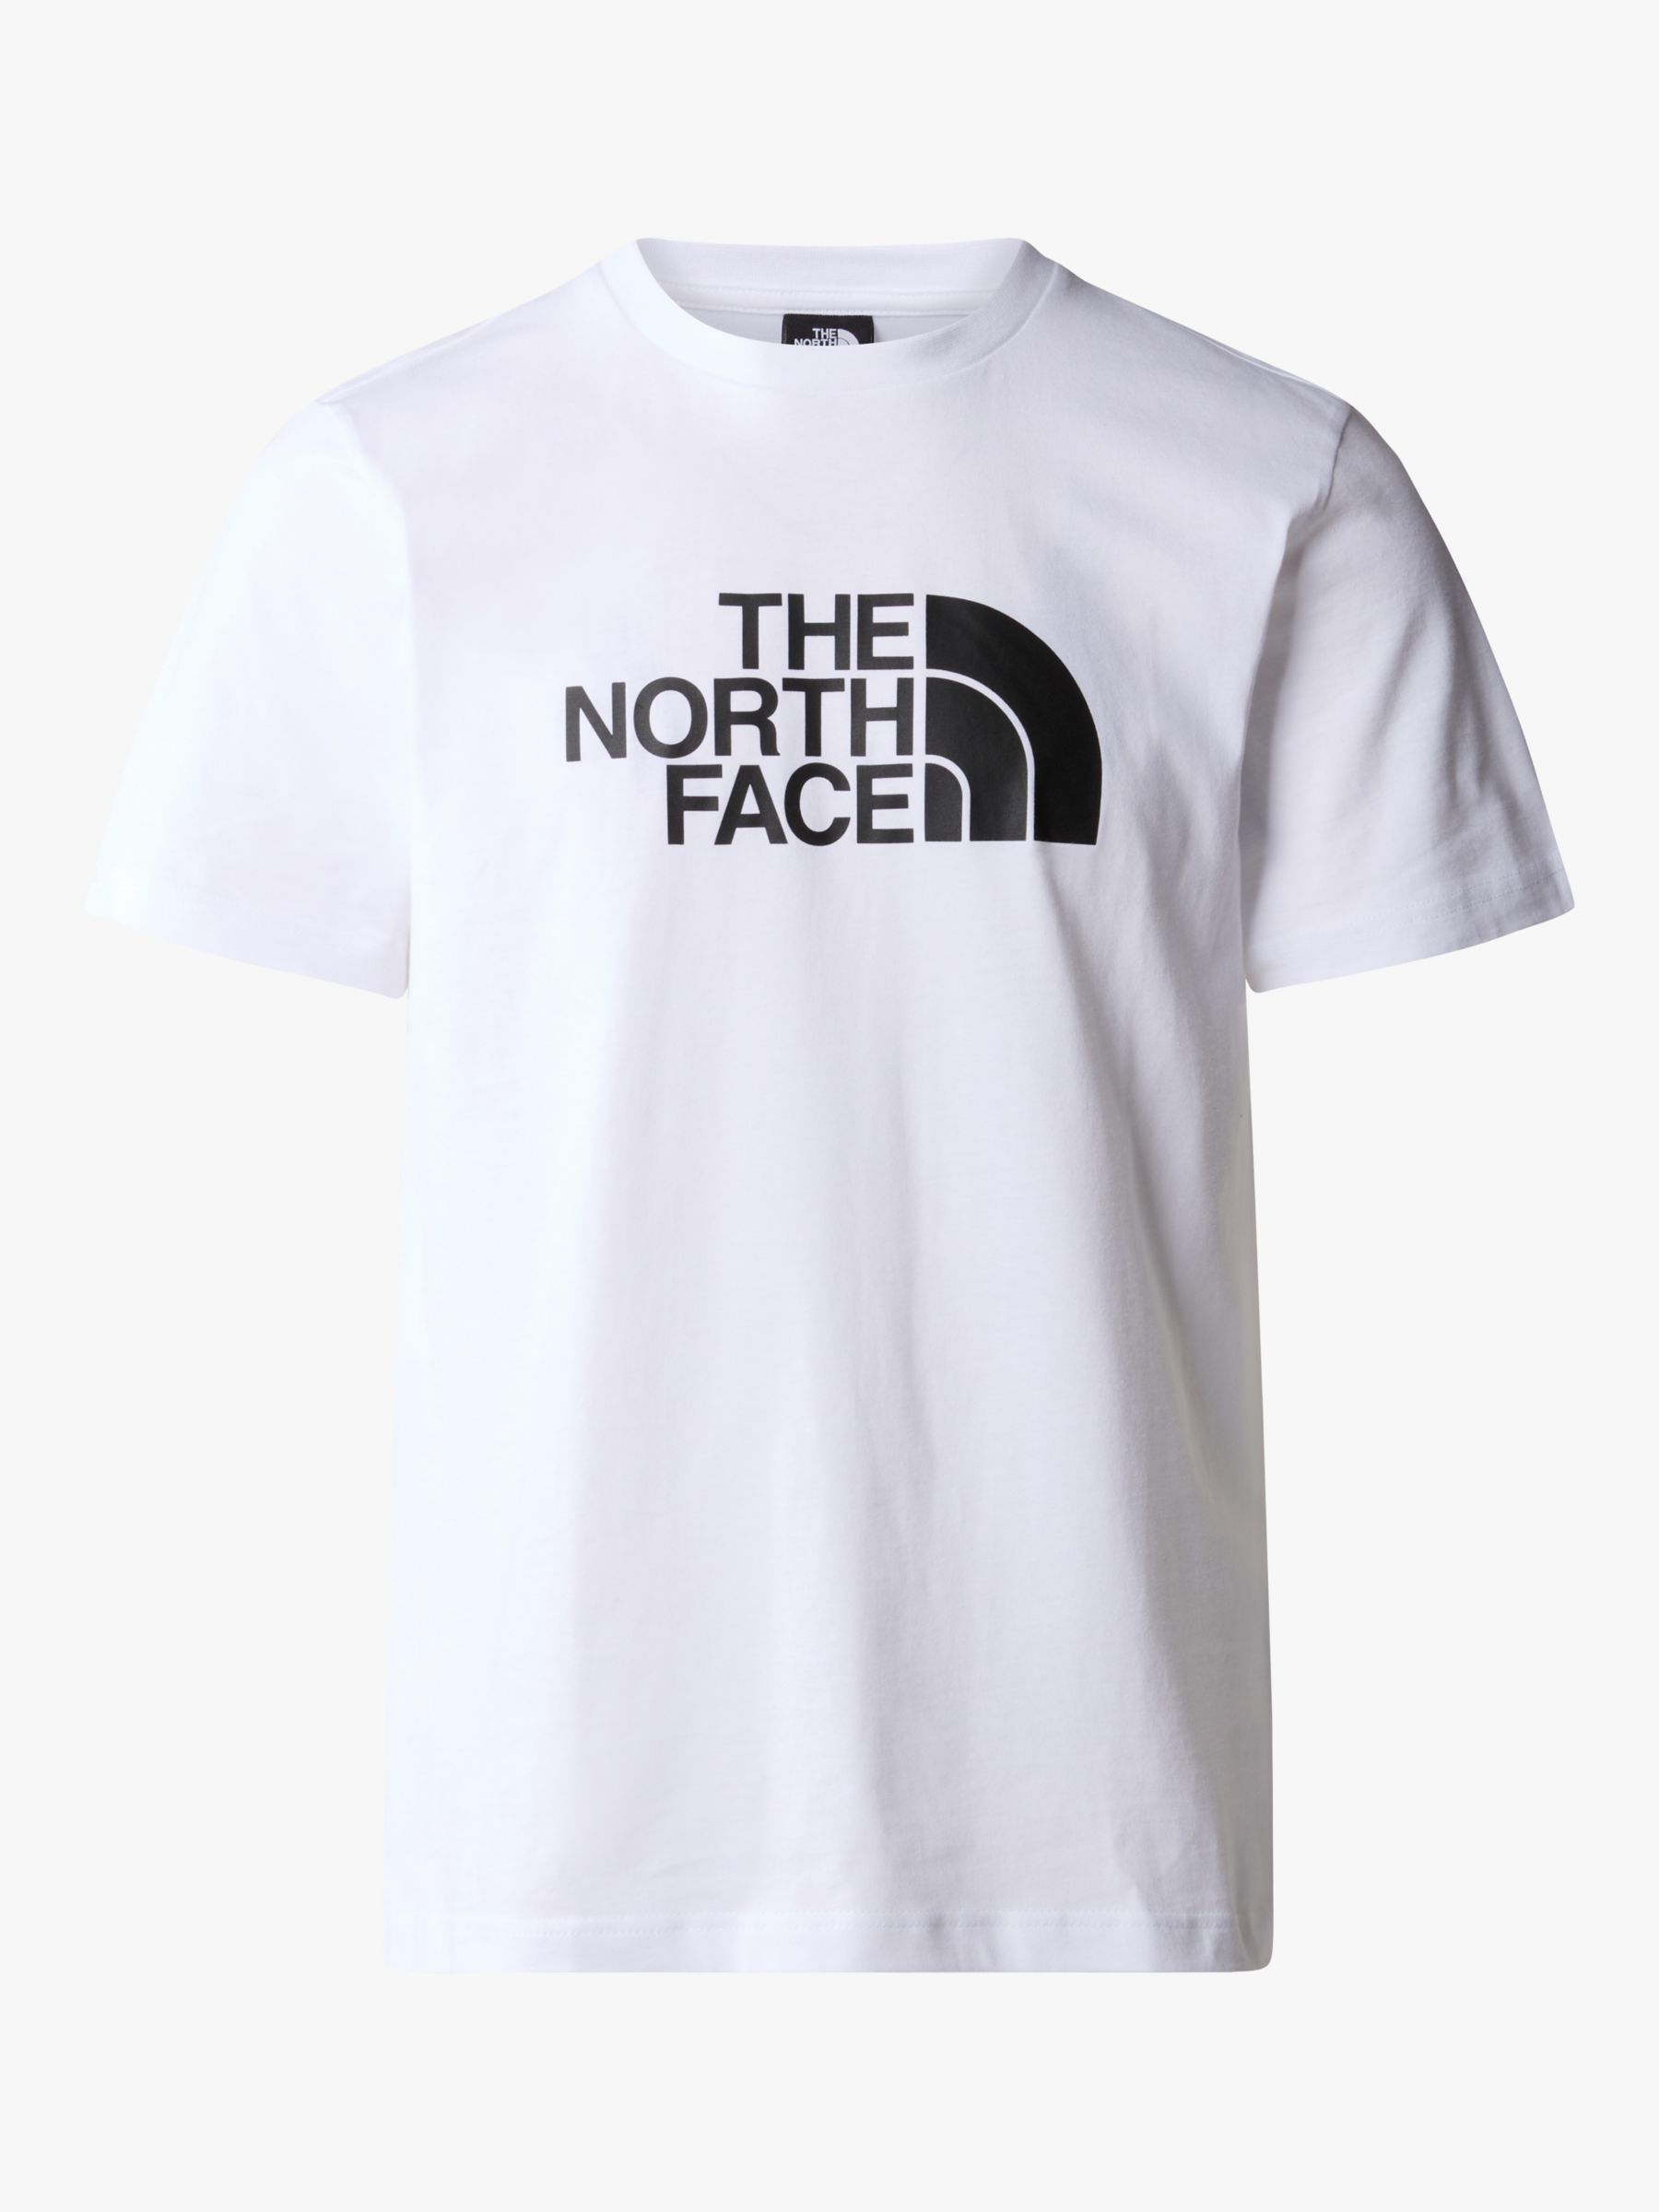 The North Face Easy Short Sleeve T-Shirt, White, M